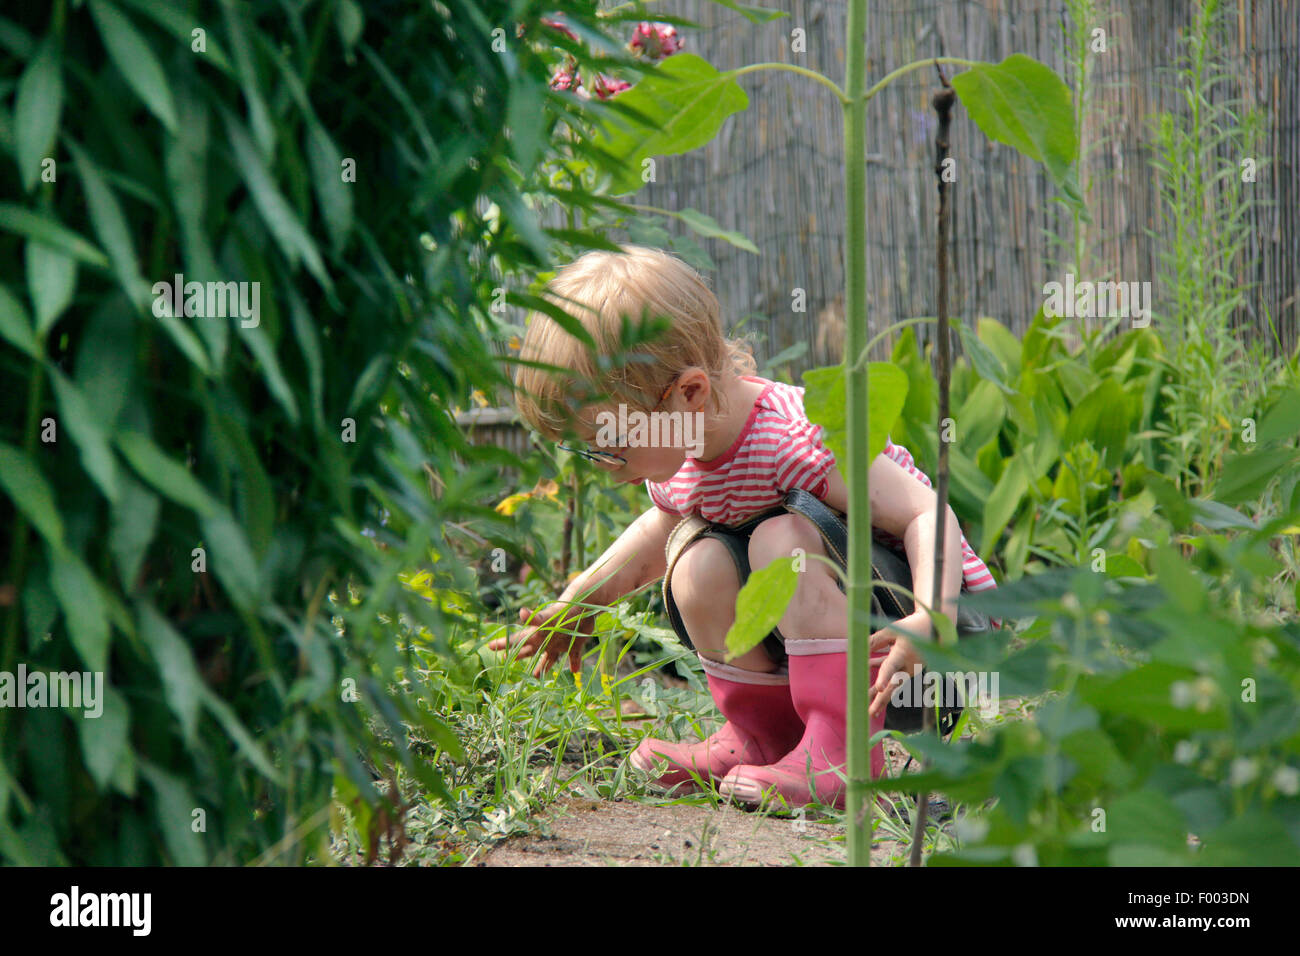 little girl playing in a garden patch, Germany Stock Photo